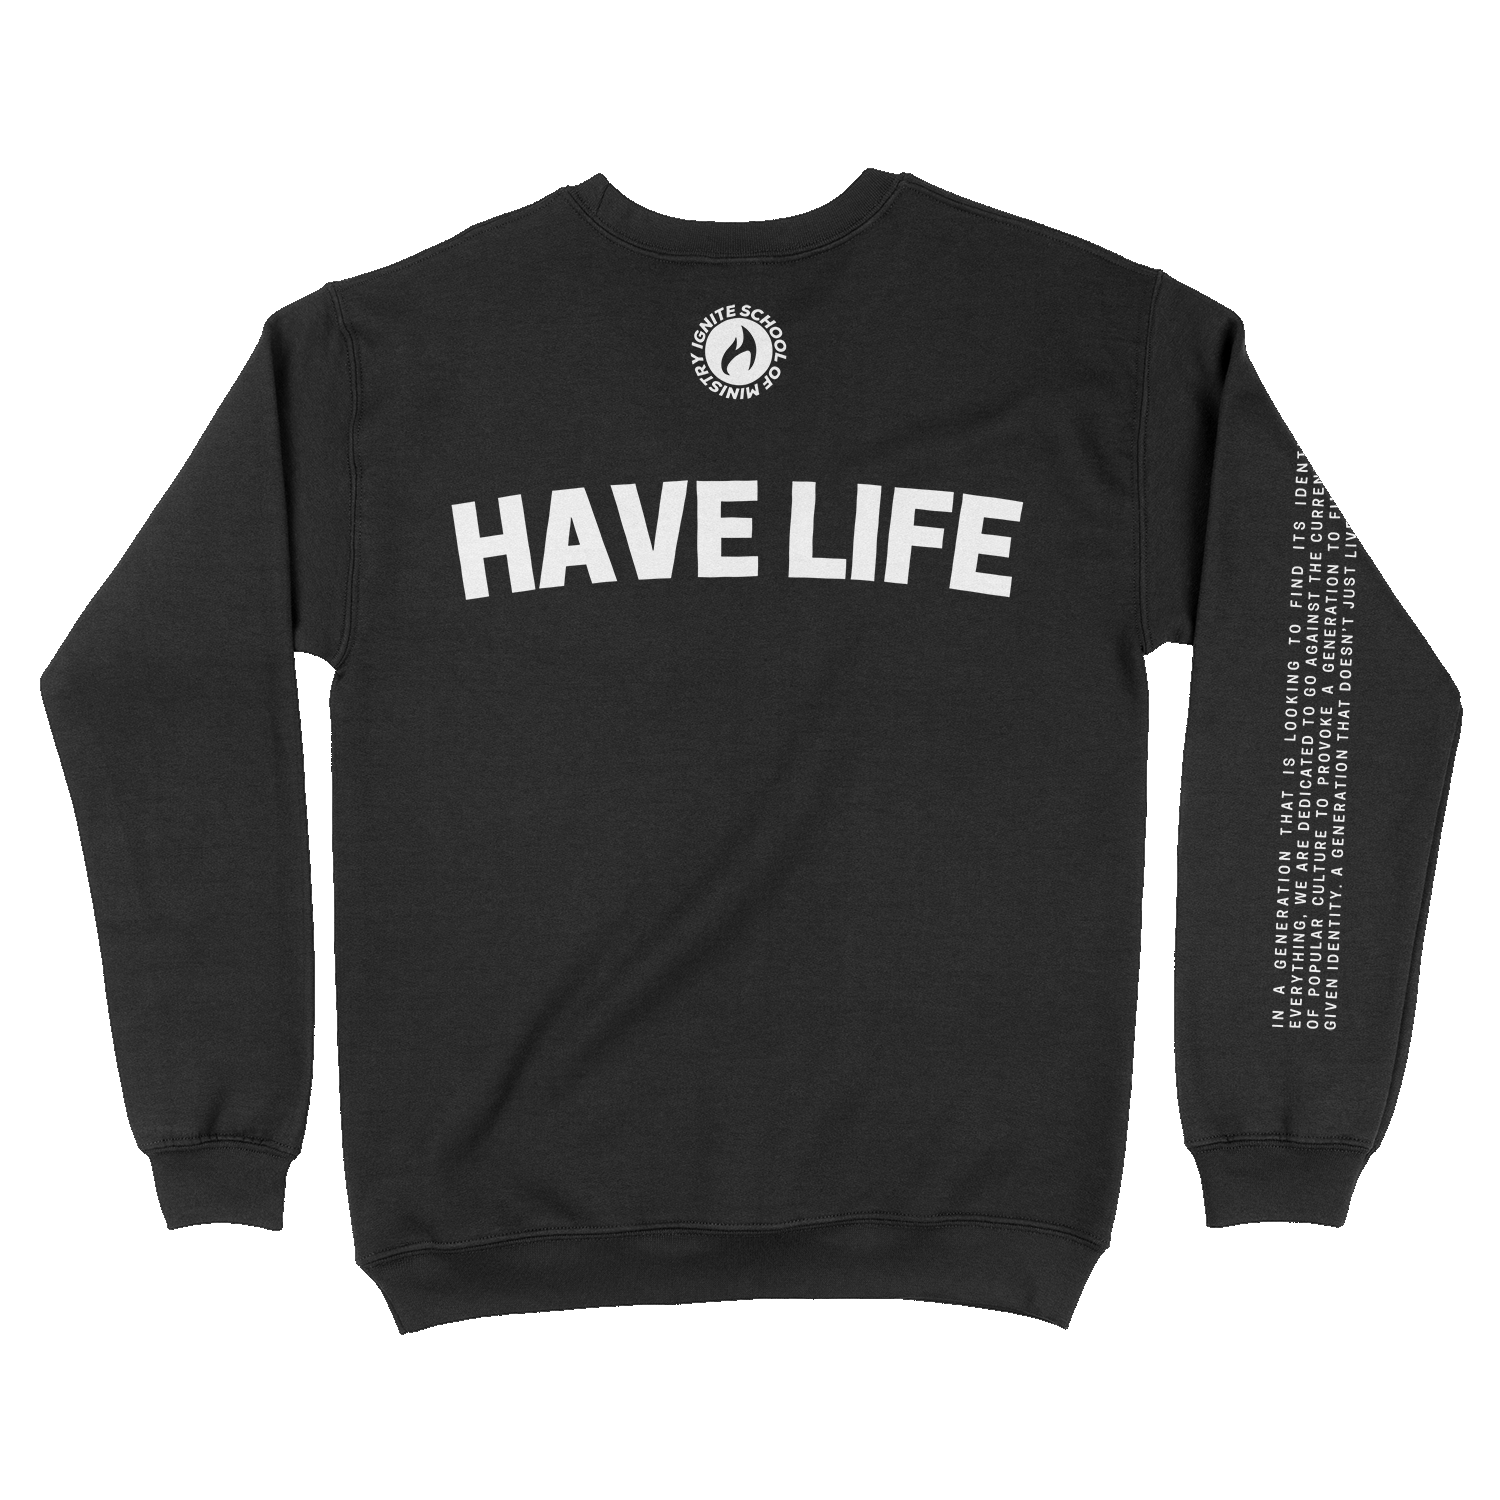 Don't Just Live Have Life Crewneck